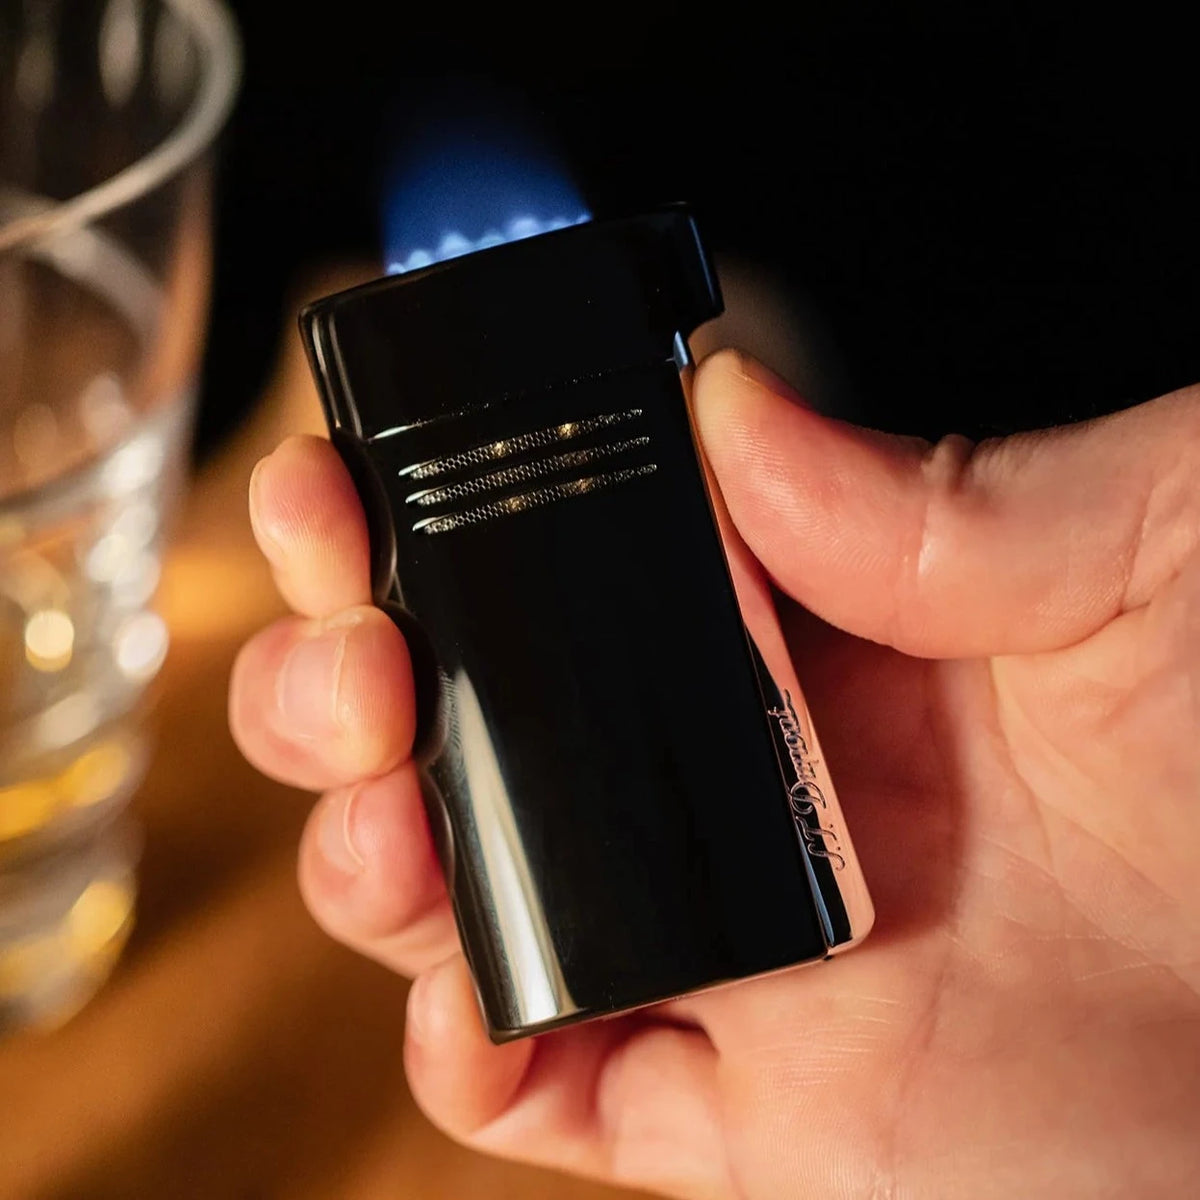 A person demonstrating S.T. Dupont Black Megajet Lighter performance by holding it next to a glass of wine.